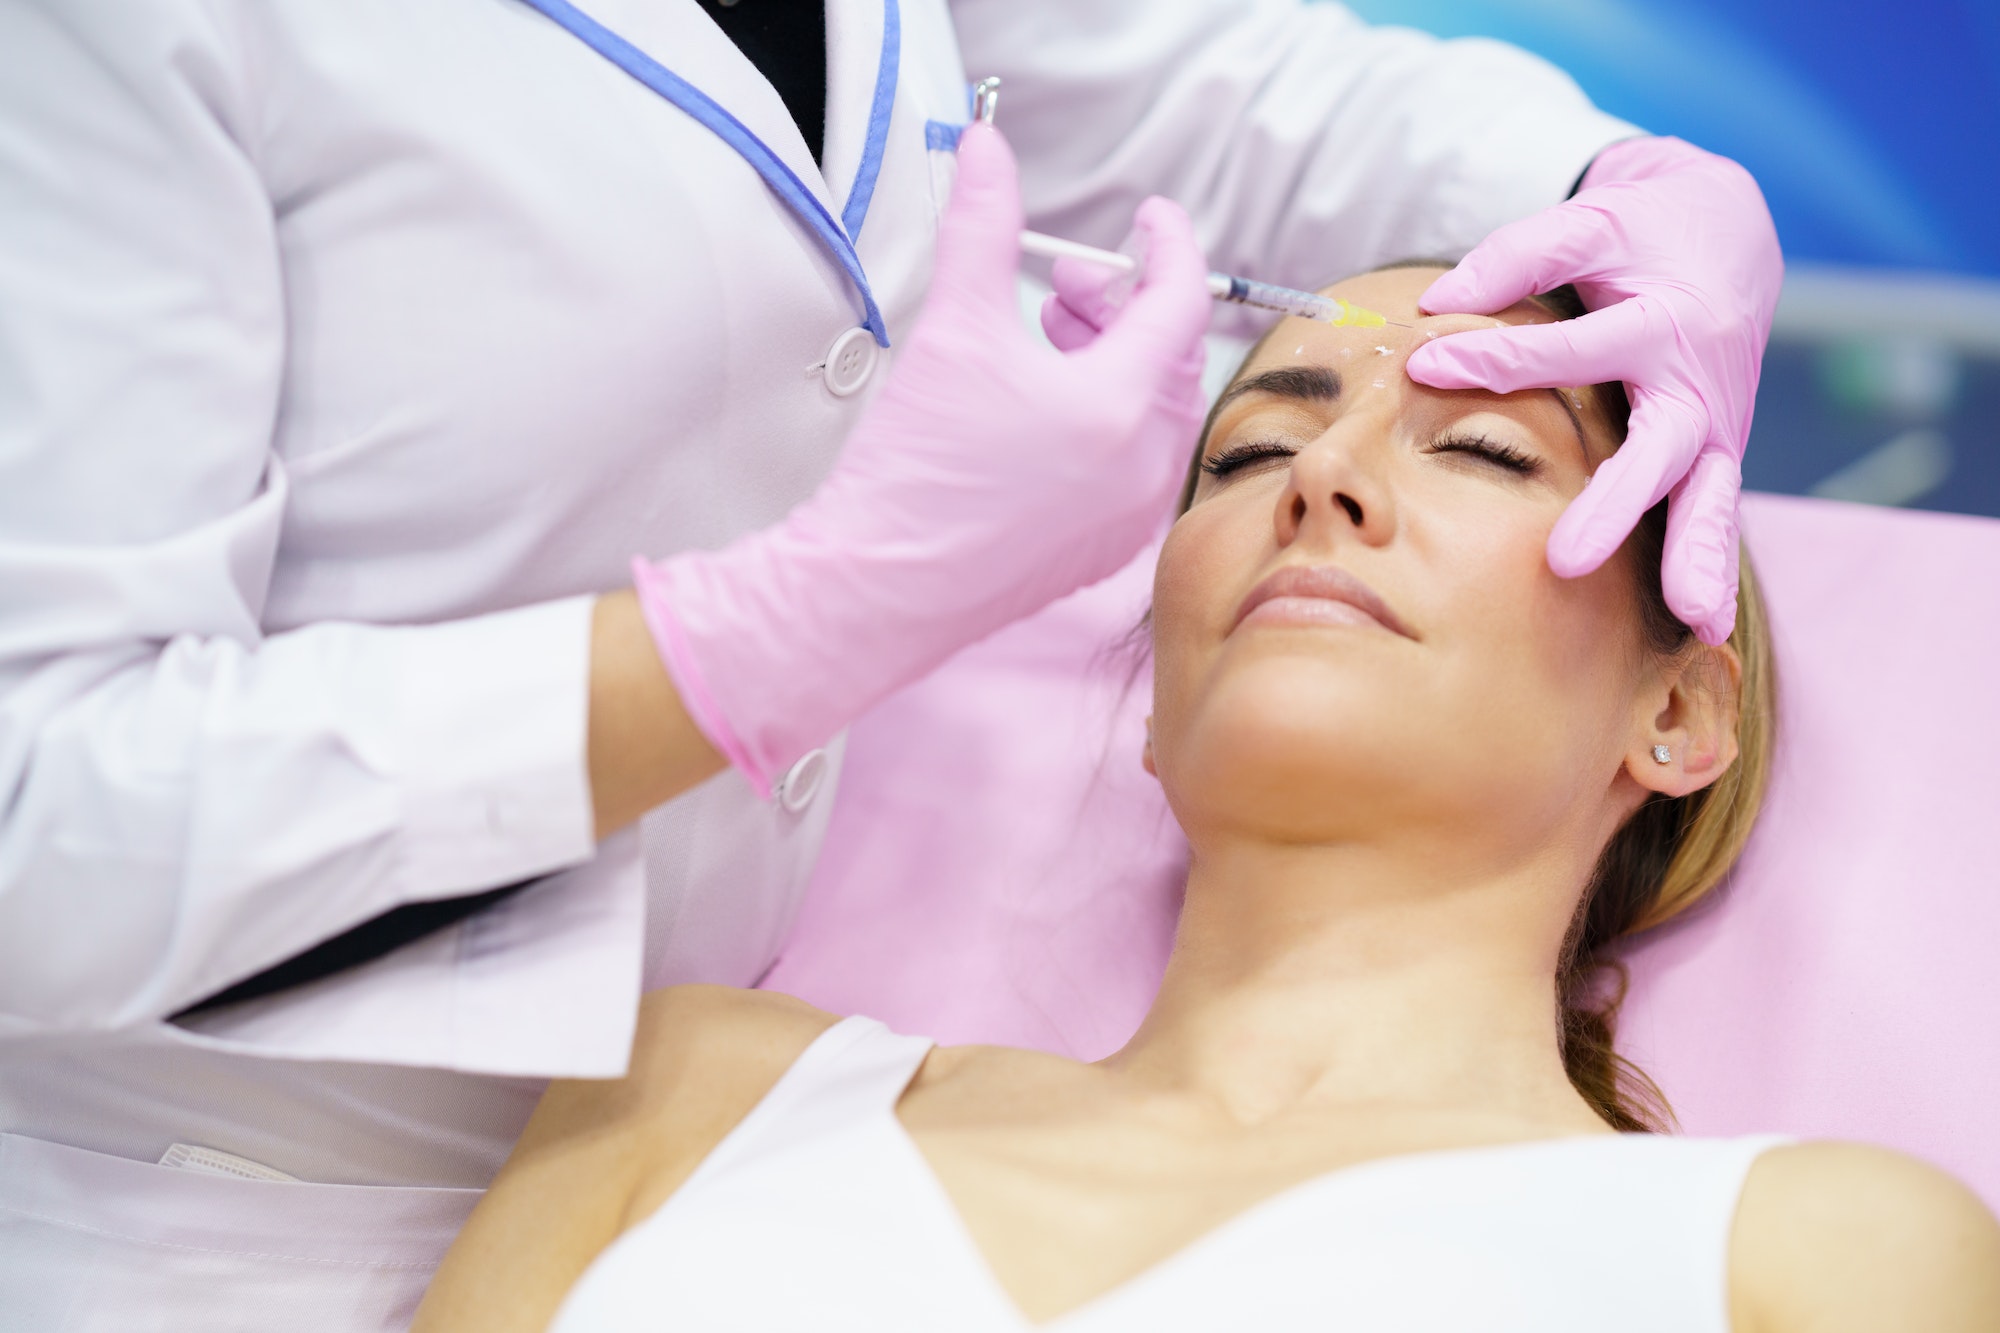 Aesthetic doctor injecting botulinum toxin into the forehead of her middle-aged patient